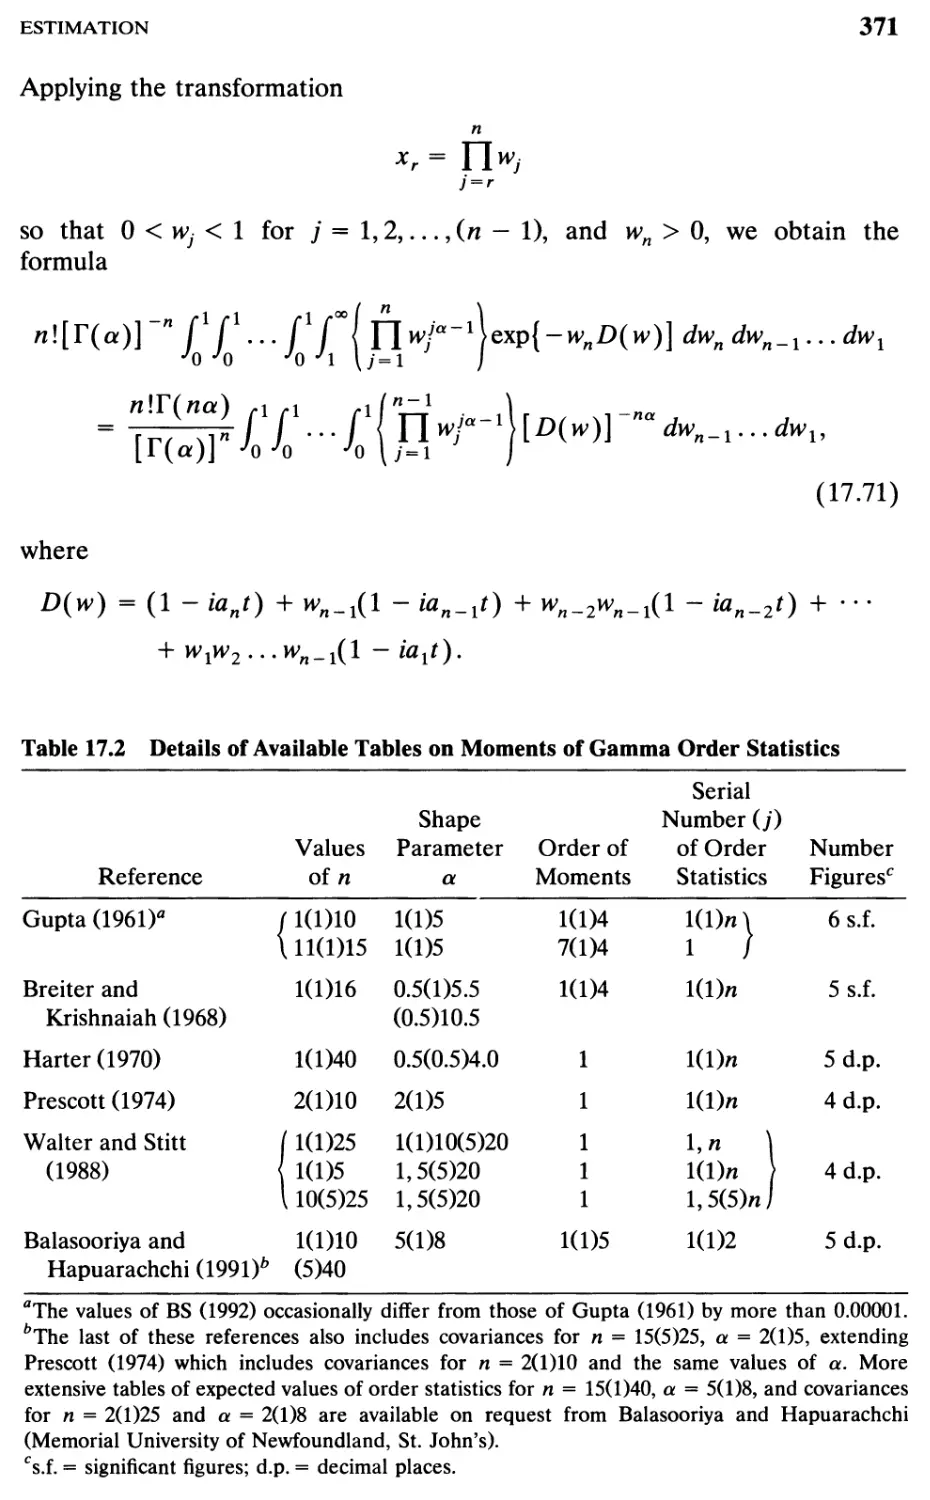 TABLE 17.2 Details of available tables on moments of gamma order statistics 371